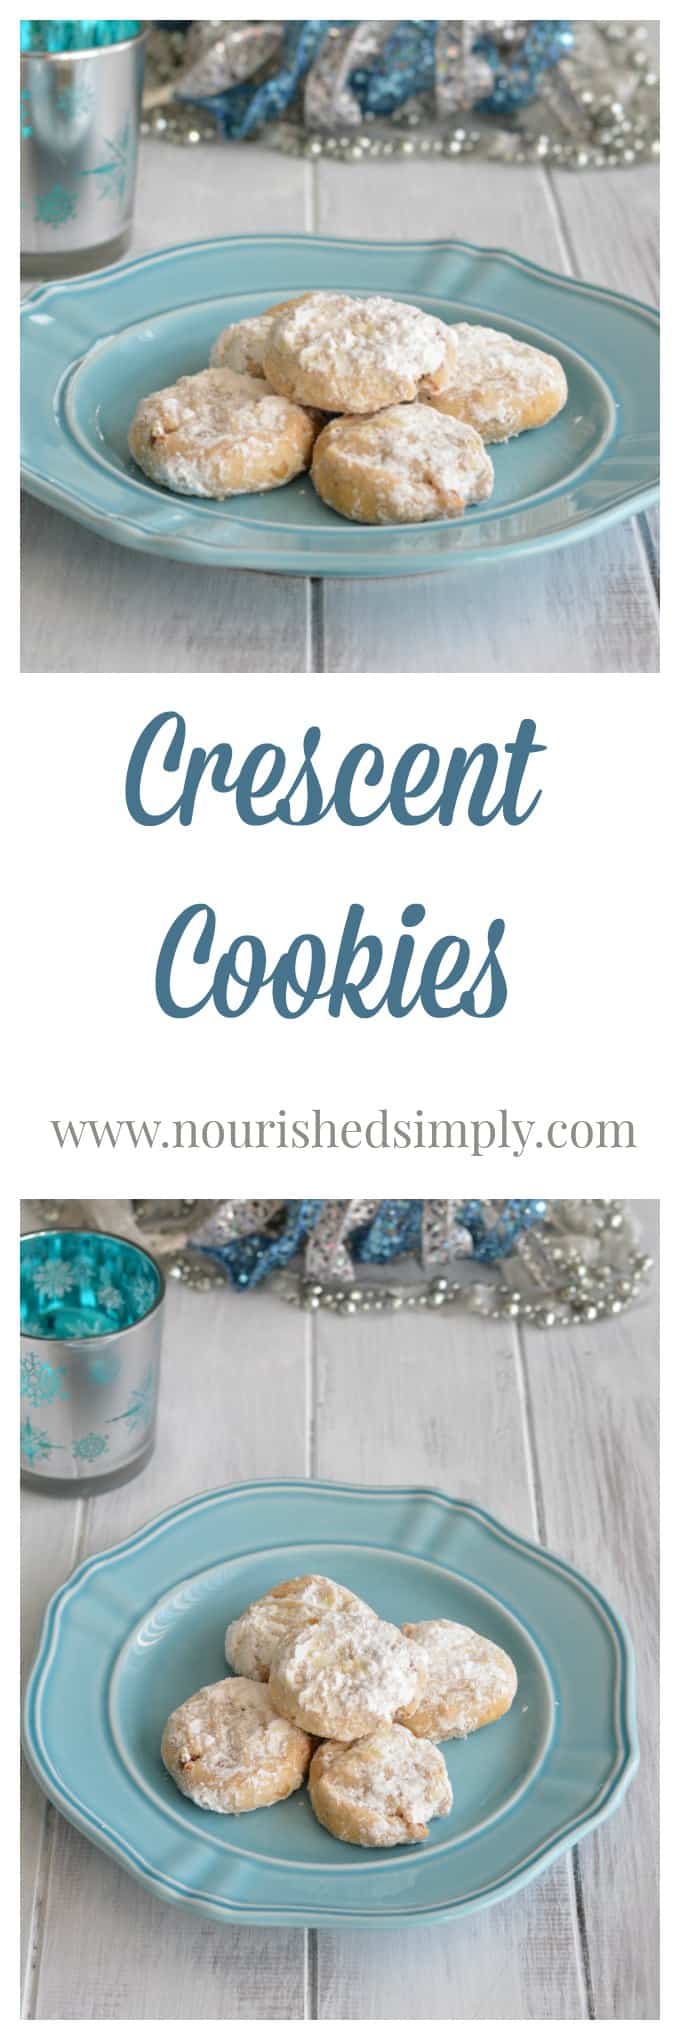 Simple ingredient crescent cookies are lower in sugar than most cookies. Perfect for this holiday season.